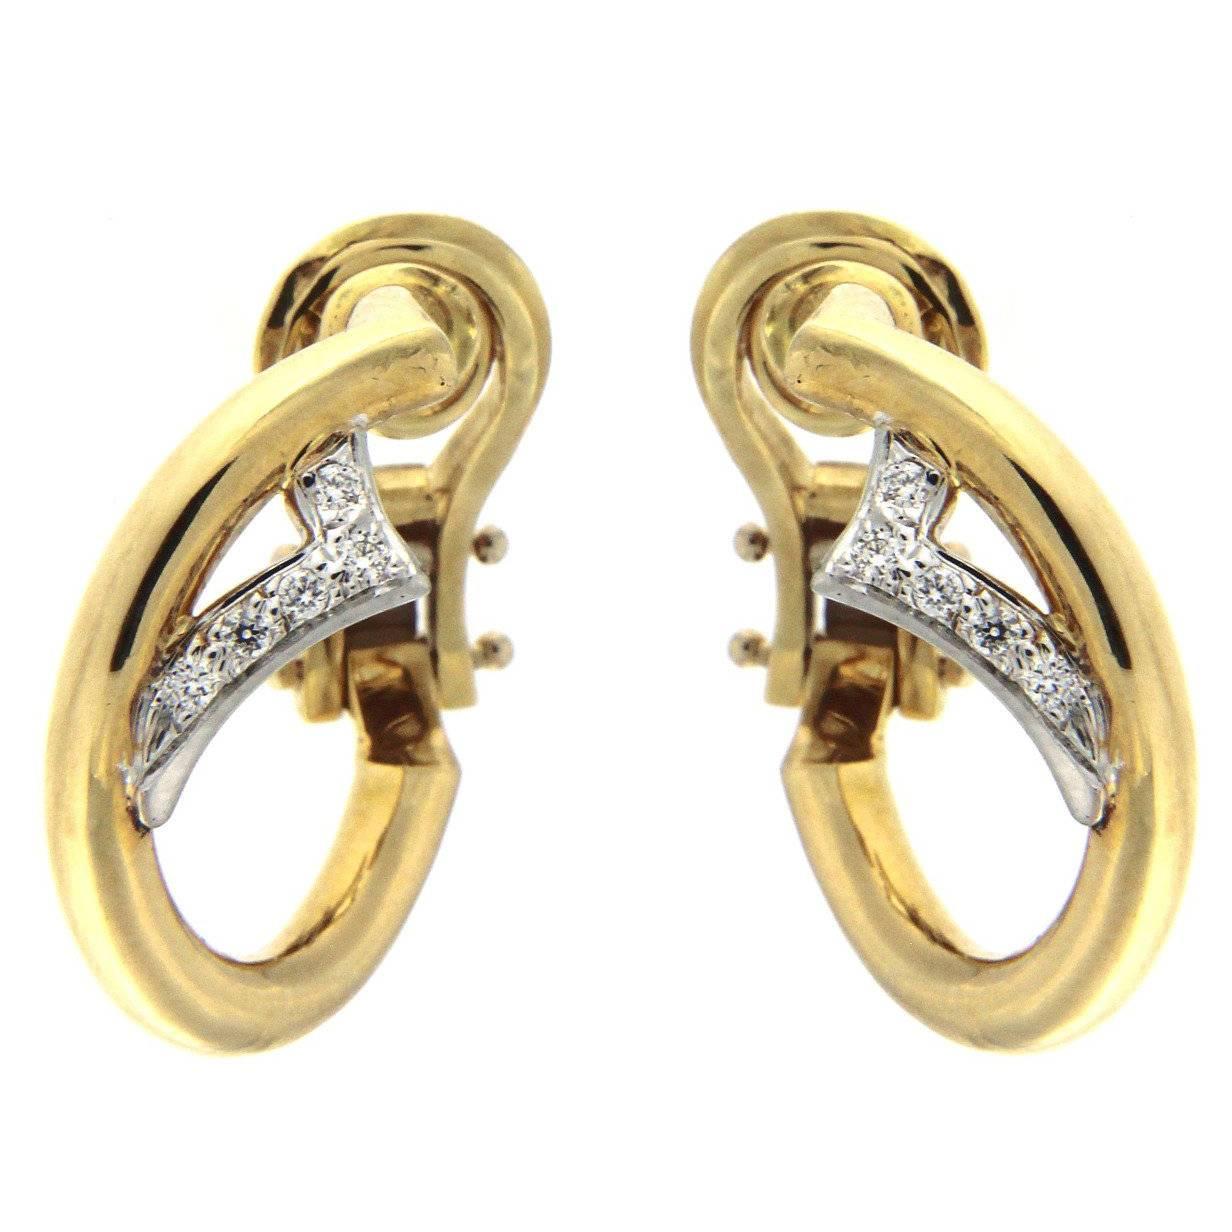 Pair of Earrings in Yellow Gold and White with Diamonds For Sale